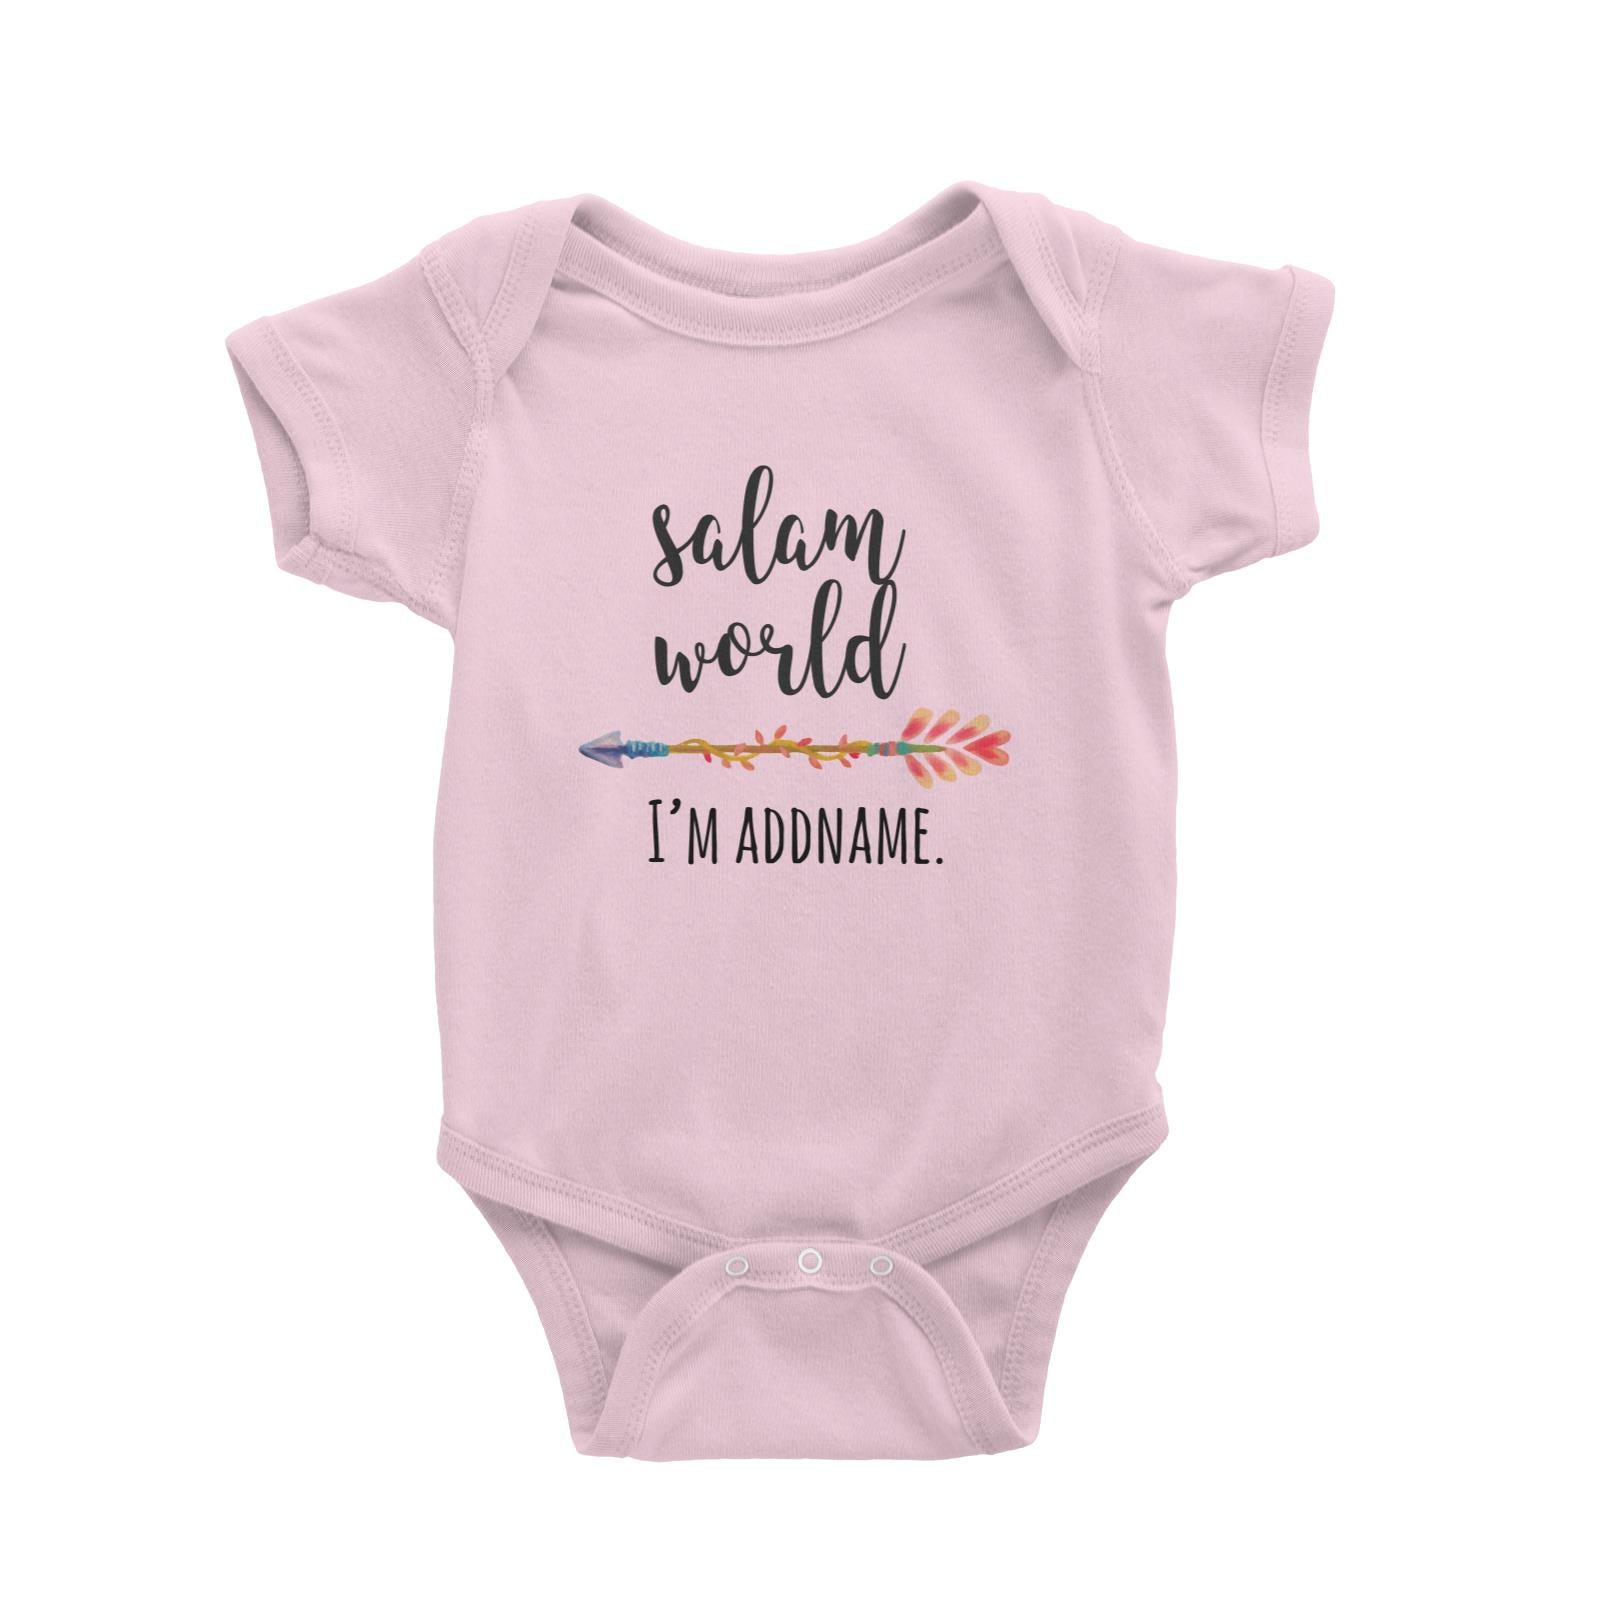 Salam World I'm Addname with Arrow Baby Romper Personalizable Designs Basic Newborn